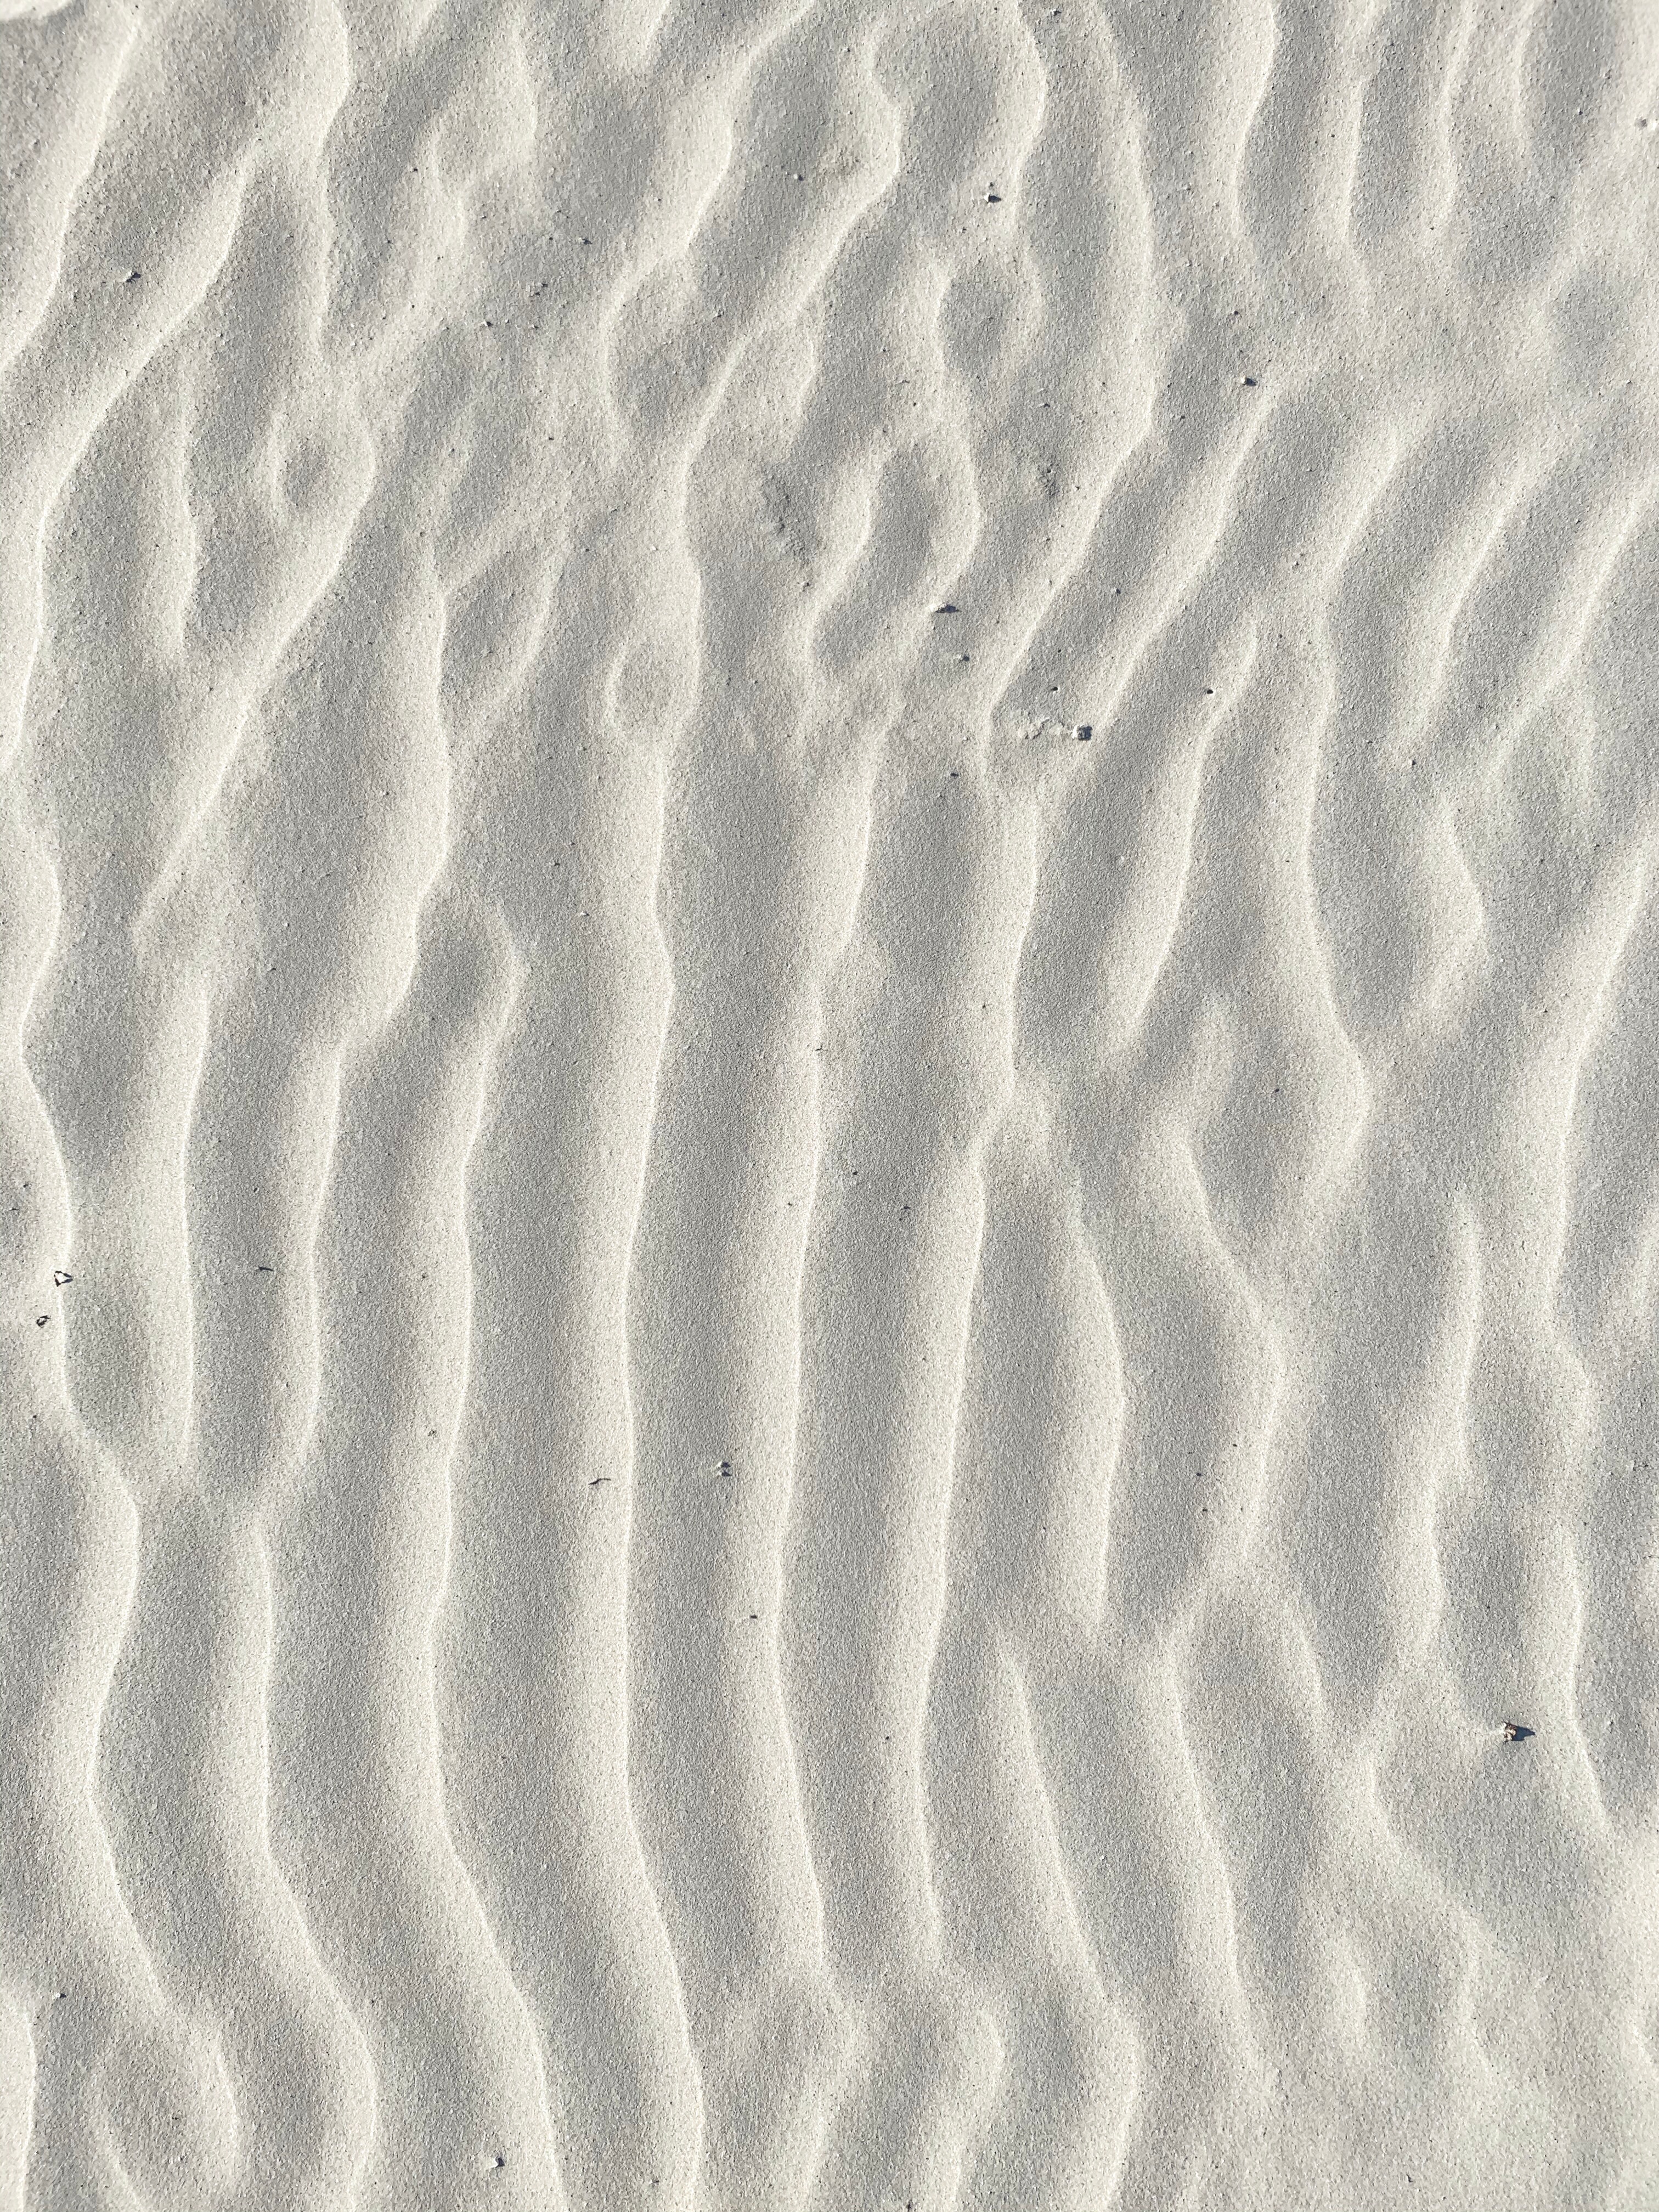 sand, texture, white, textures, wavy Full HD